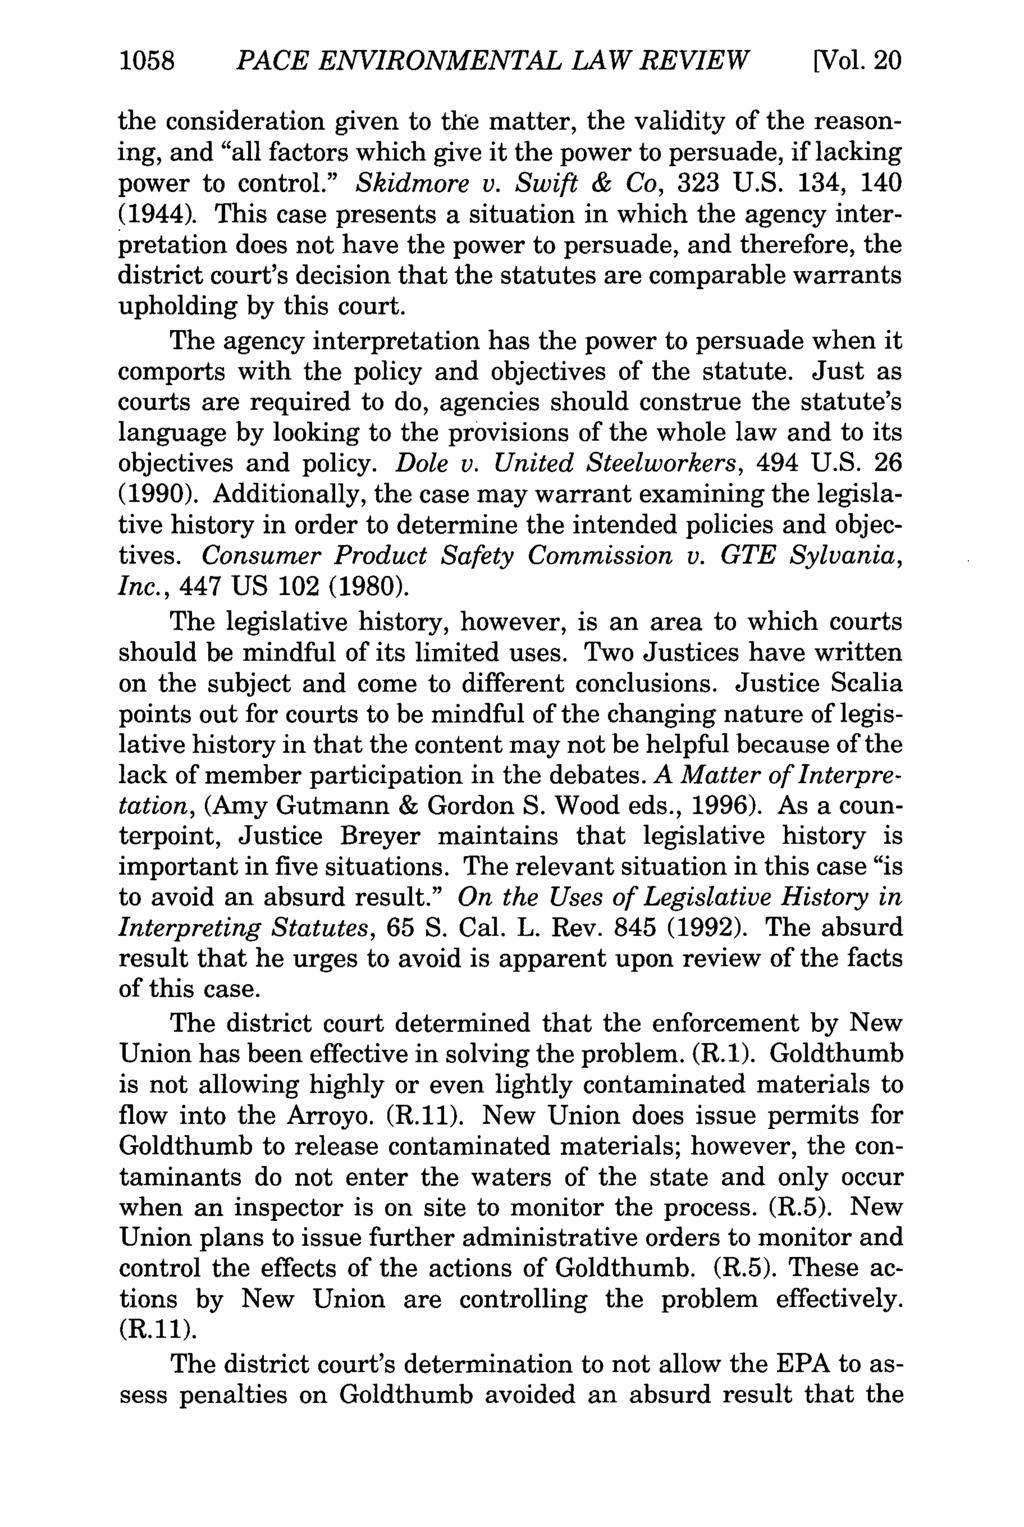 1058 PACE ENVIRONMENTAL LAW REVIEW [Vol. 20 the consideration given to the matter, the validity of the reasoning, and "all factors which give it the power to persuade, if lacking power to control.